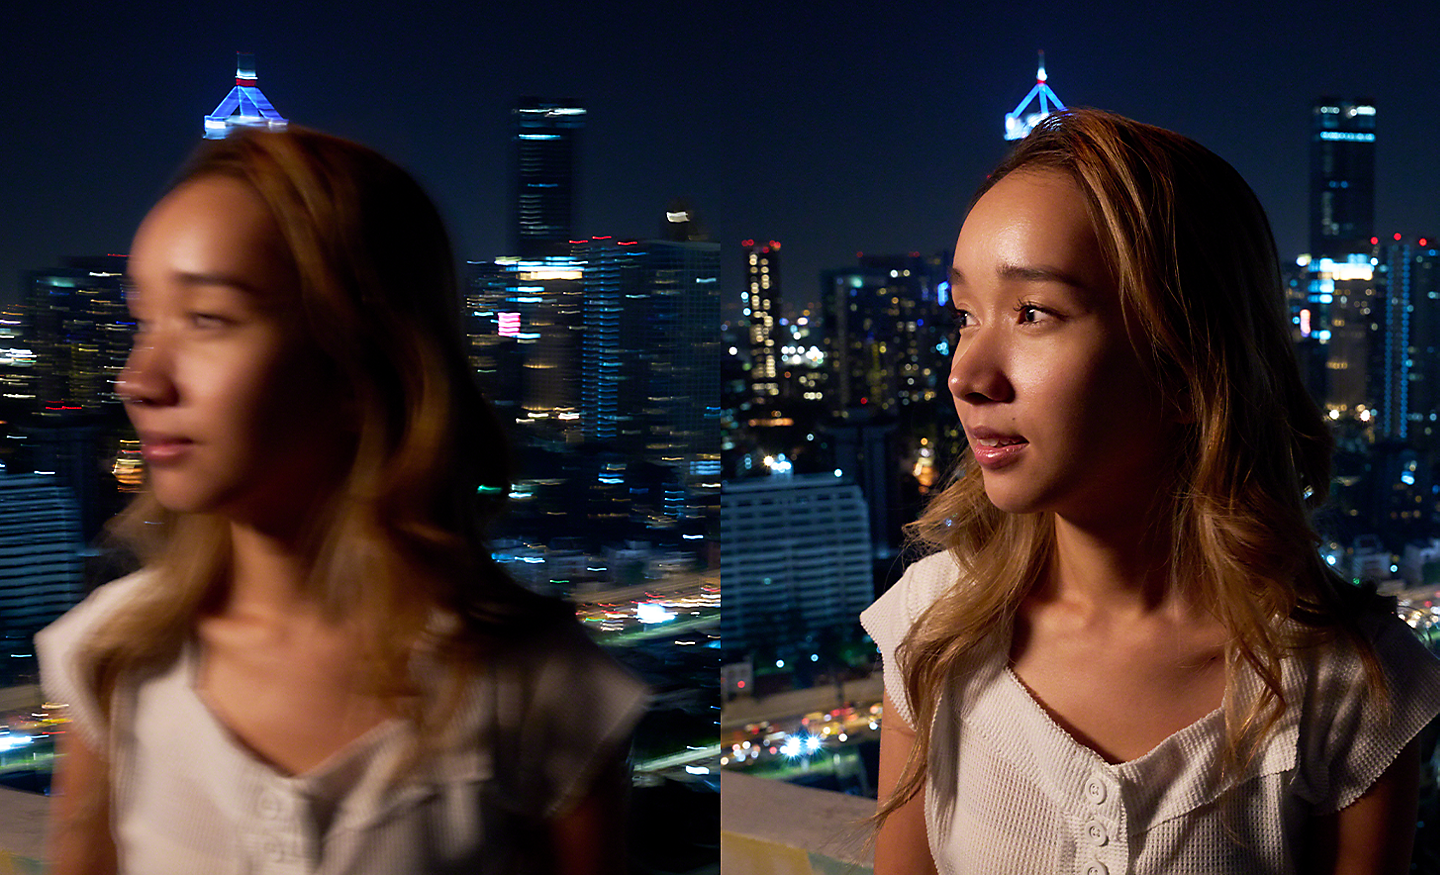 Side-by-side images of a young woman at night – the left-hand image is blurred, the right-hand image is sharp